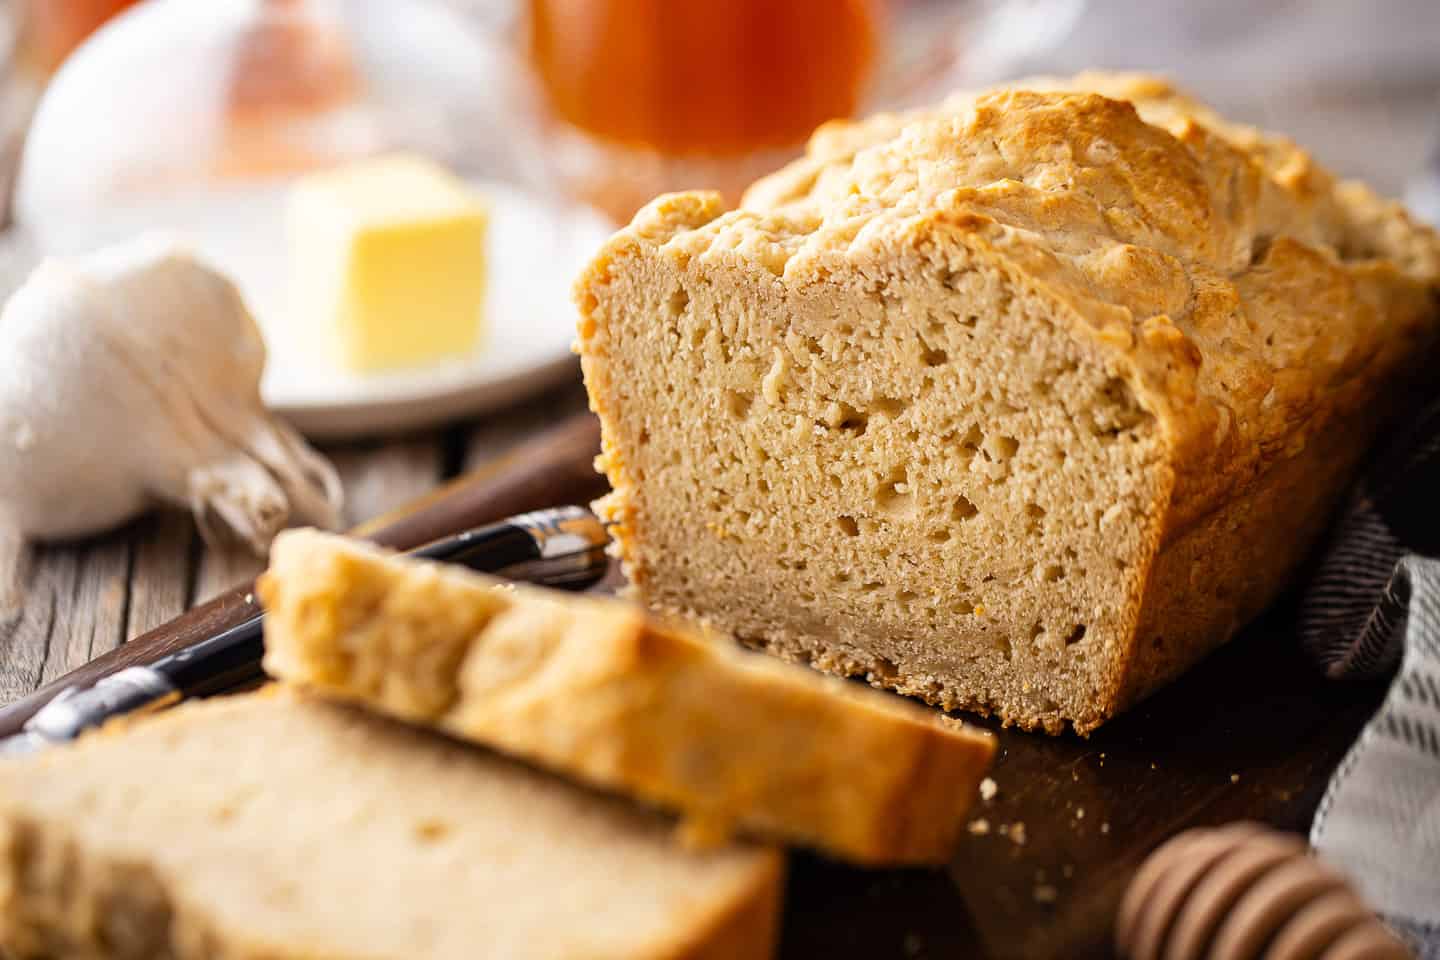 How to make beer bread, step by step with pictures.